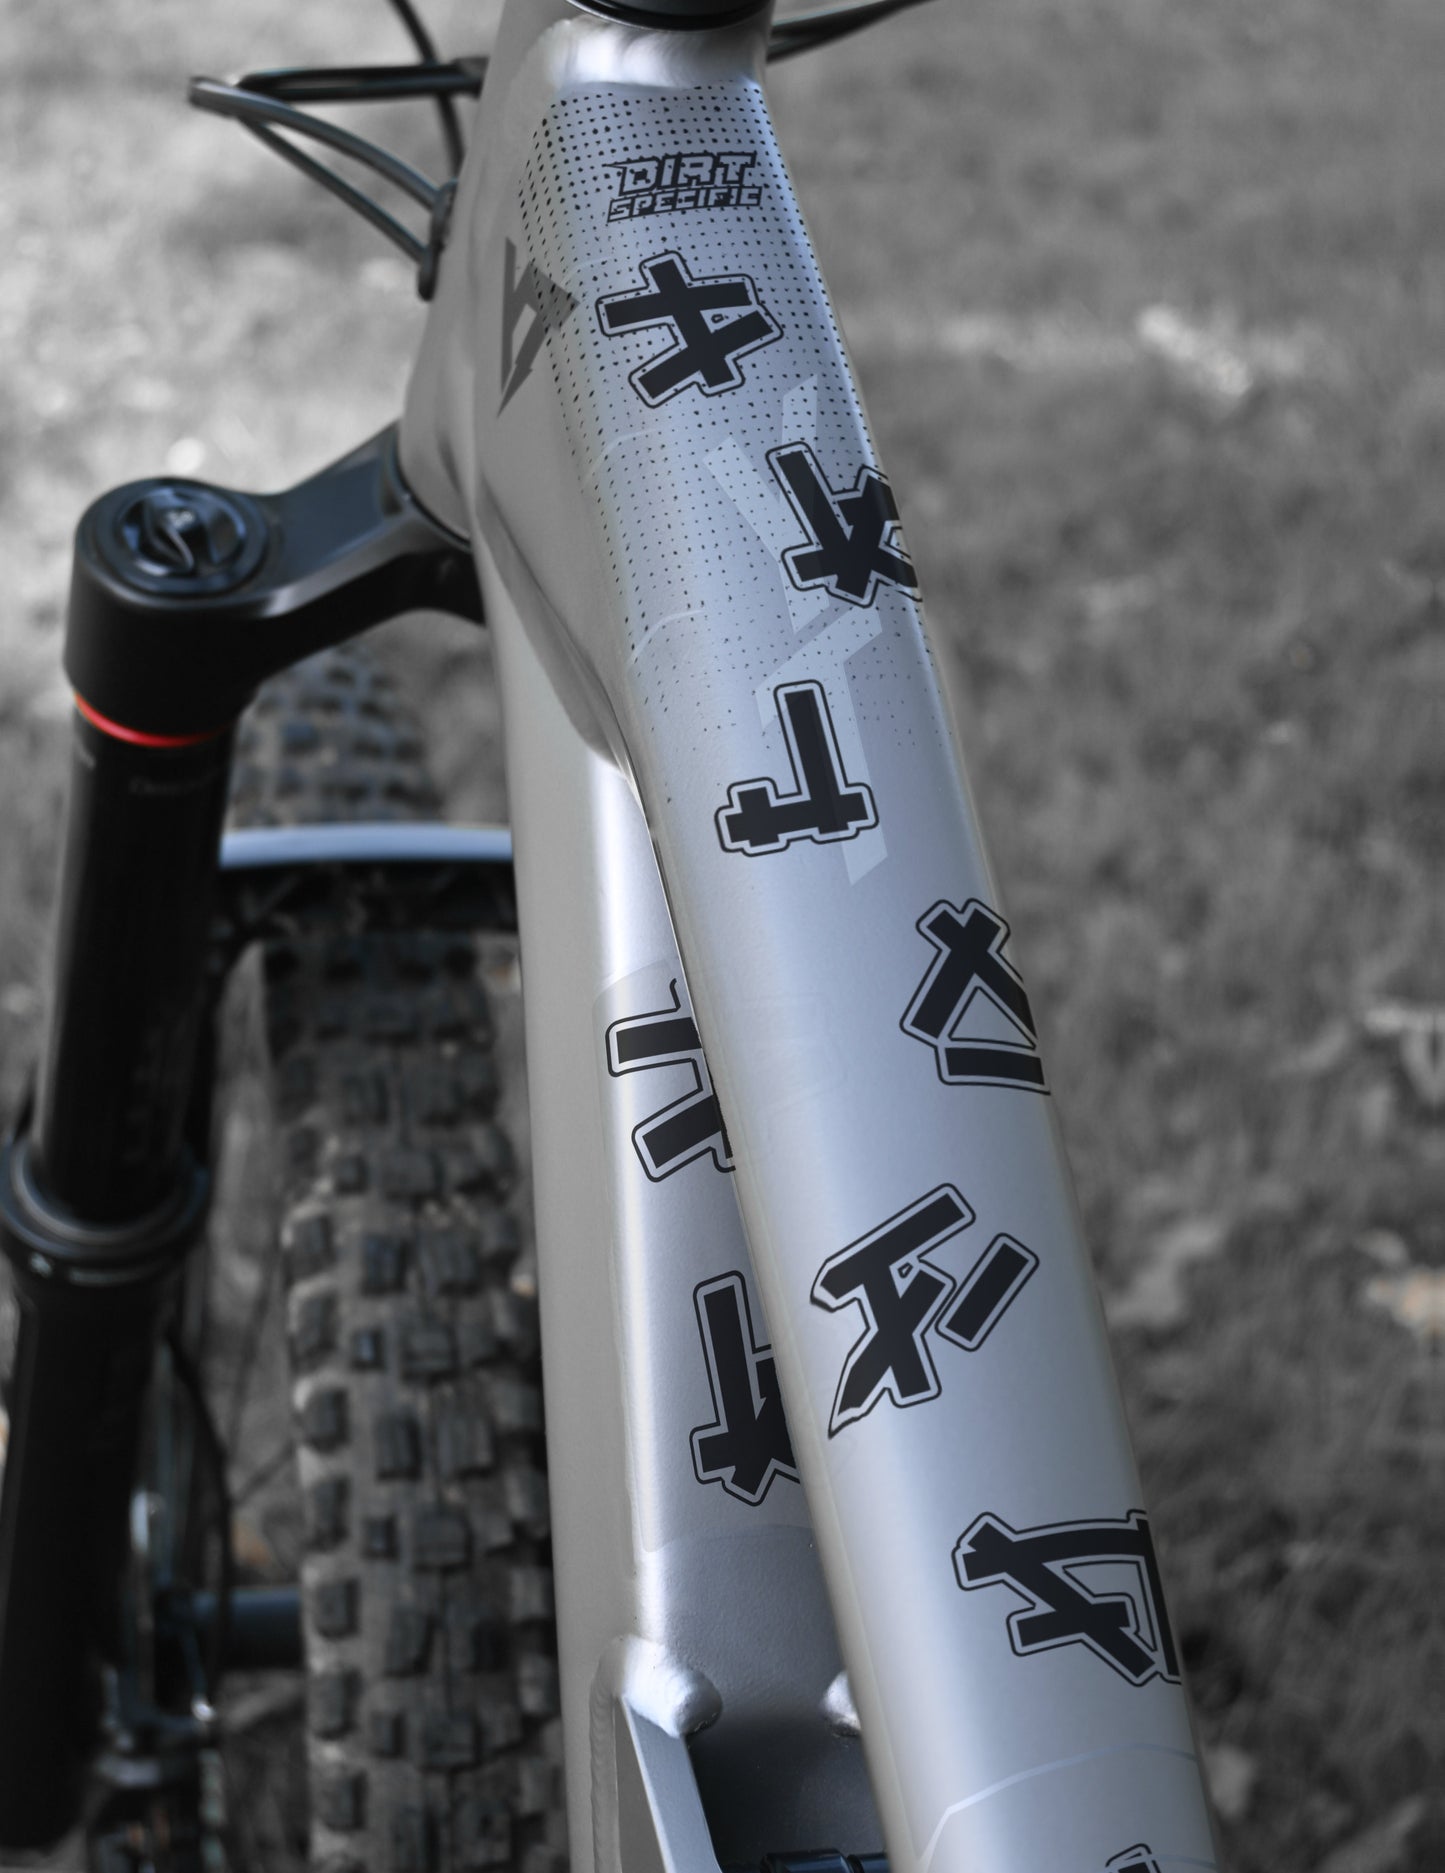 For white bike decal